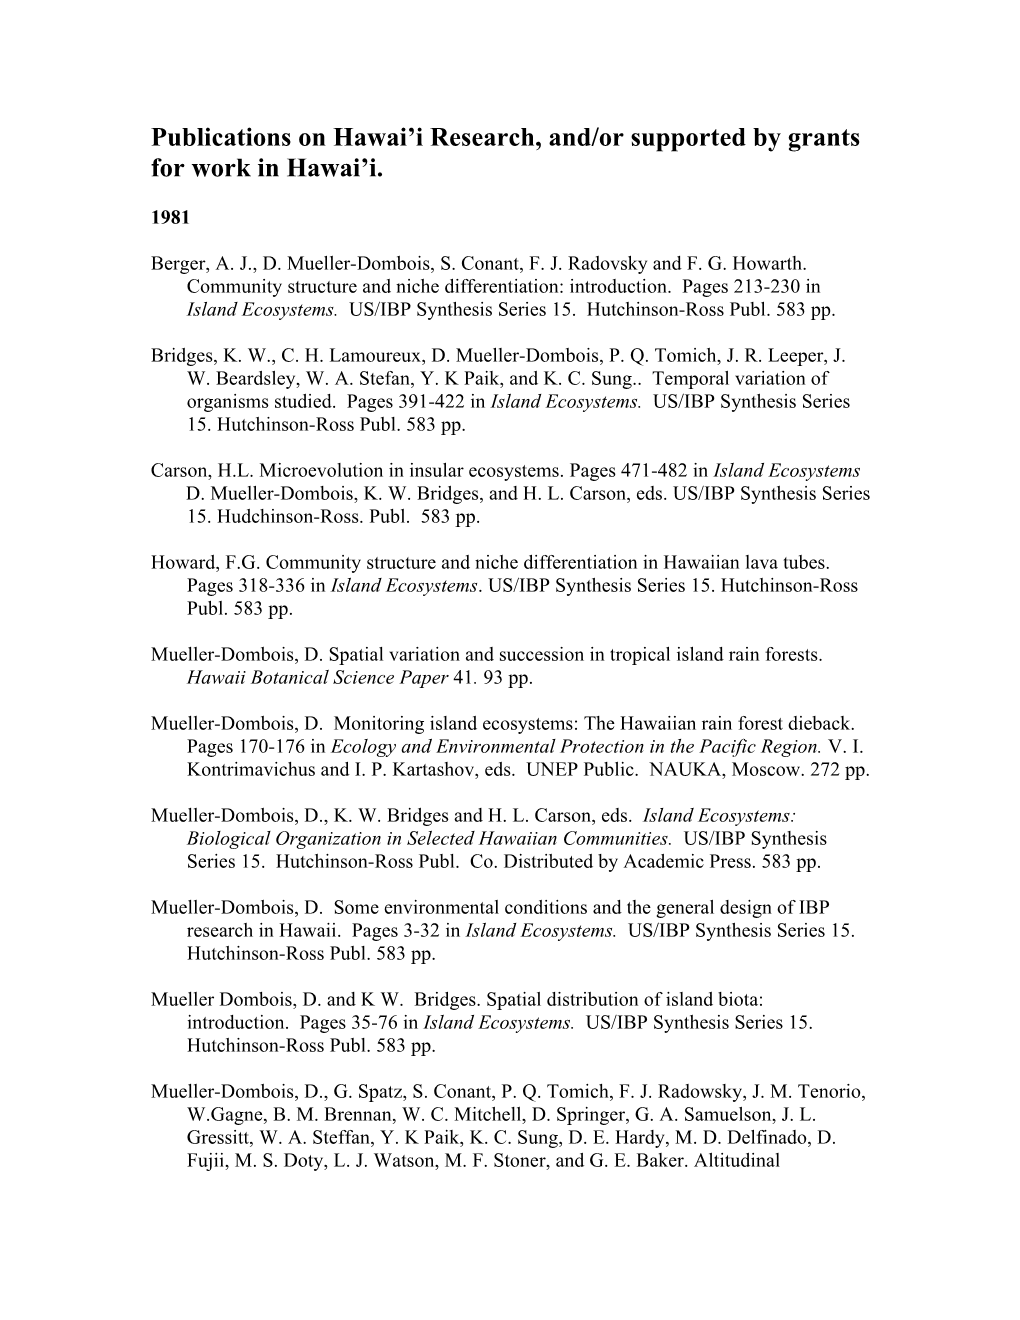 Publications on Hawai I Research, And/Or Supported by Grants for Work in Hawai I